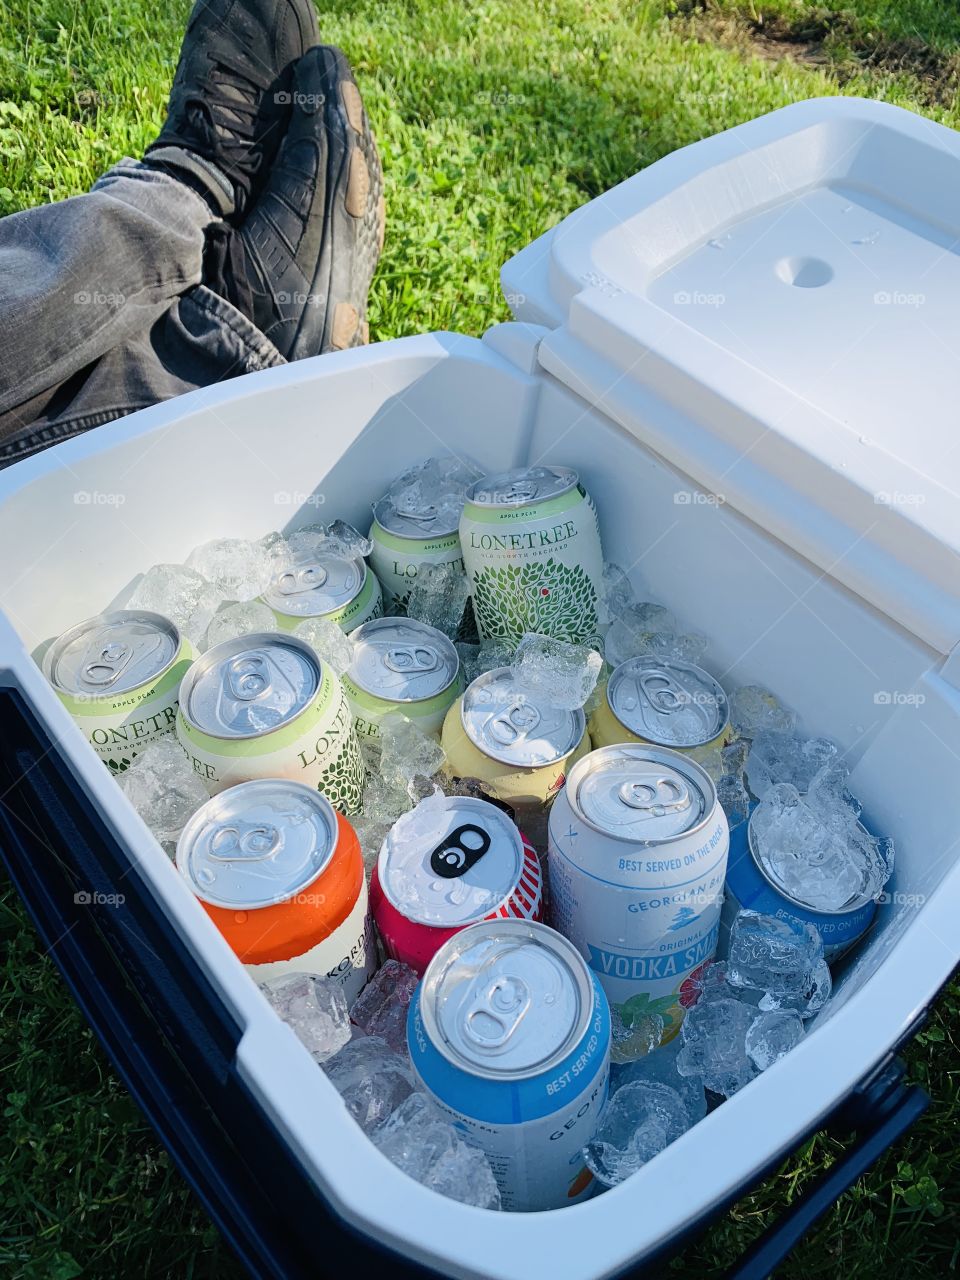 First hot day for summer 2019 calls for a cooler full of drinks 